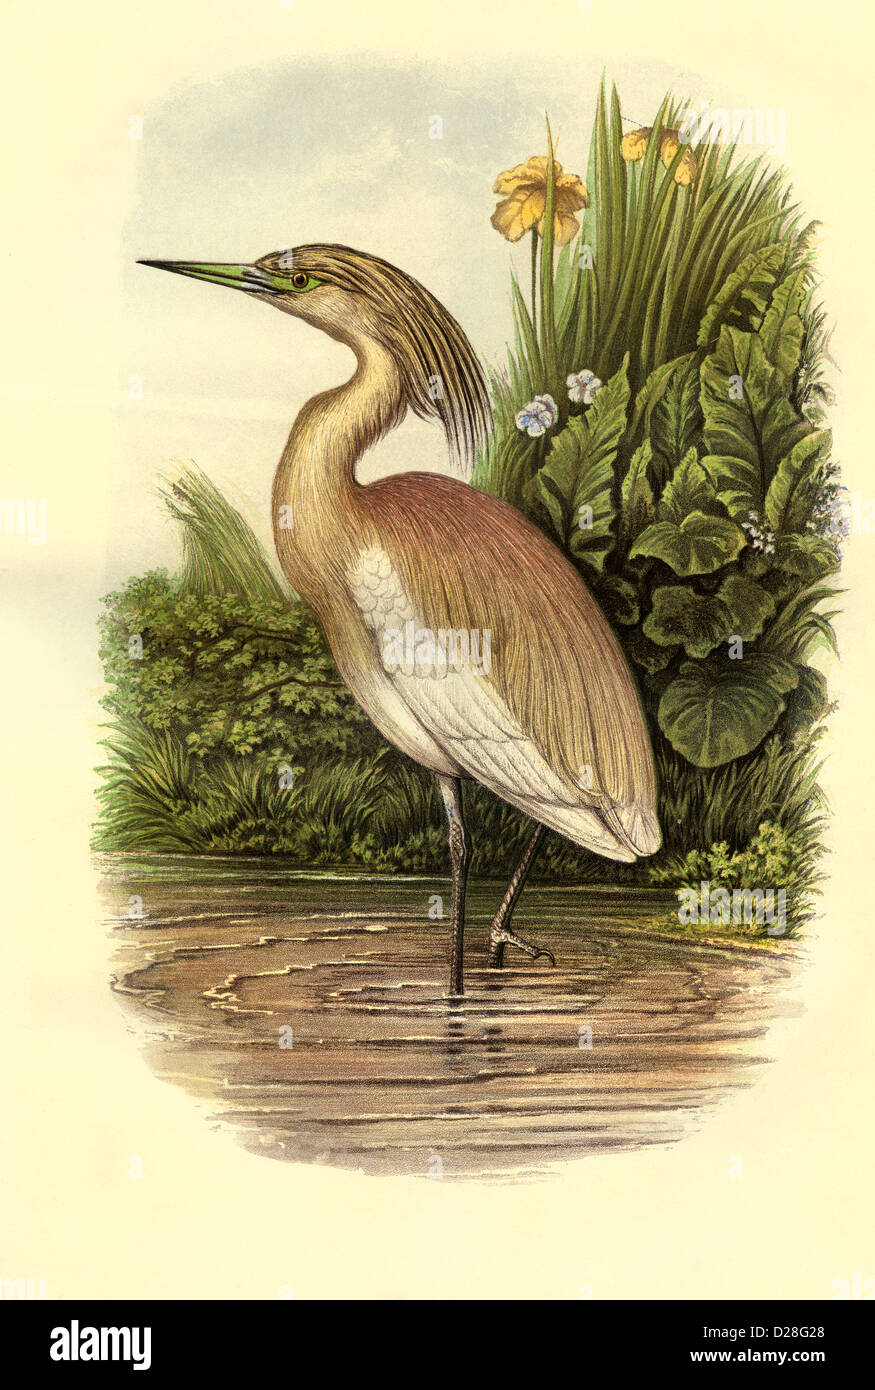 HERON SQUACCO BIRD HERON HI-resolution enhanced scan of antiquarian Victorian colour Lithograph from 1860's Cassell's Book of Birds SQUACCO HERON Stock Photo